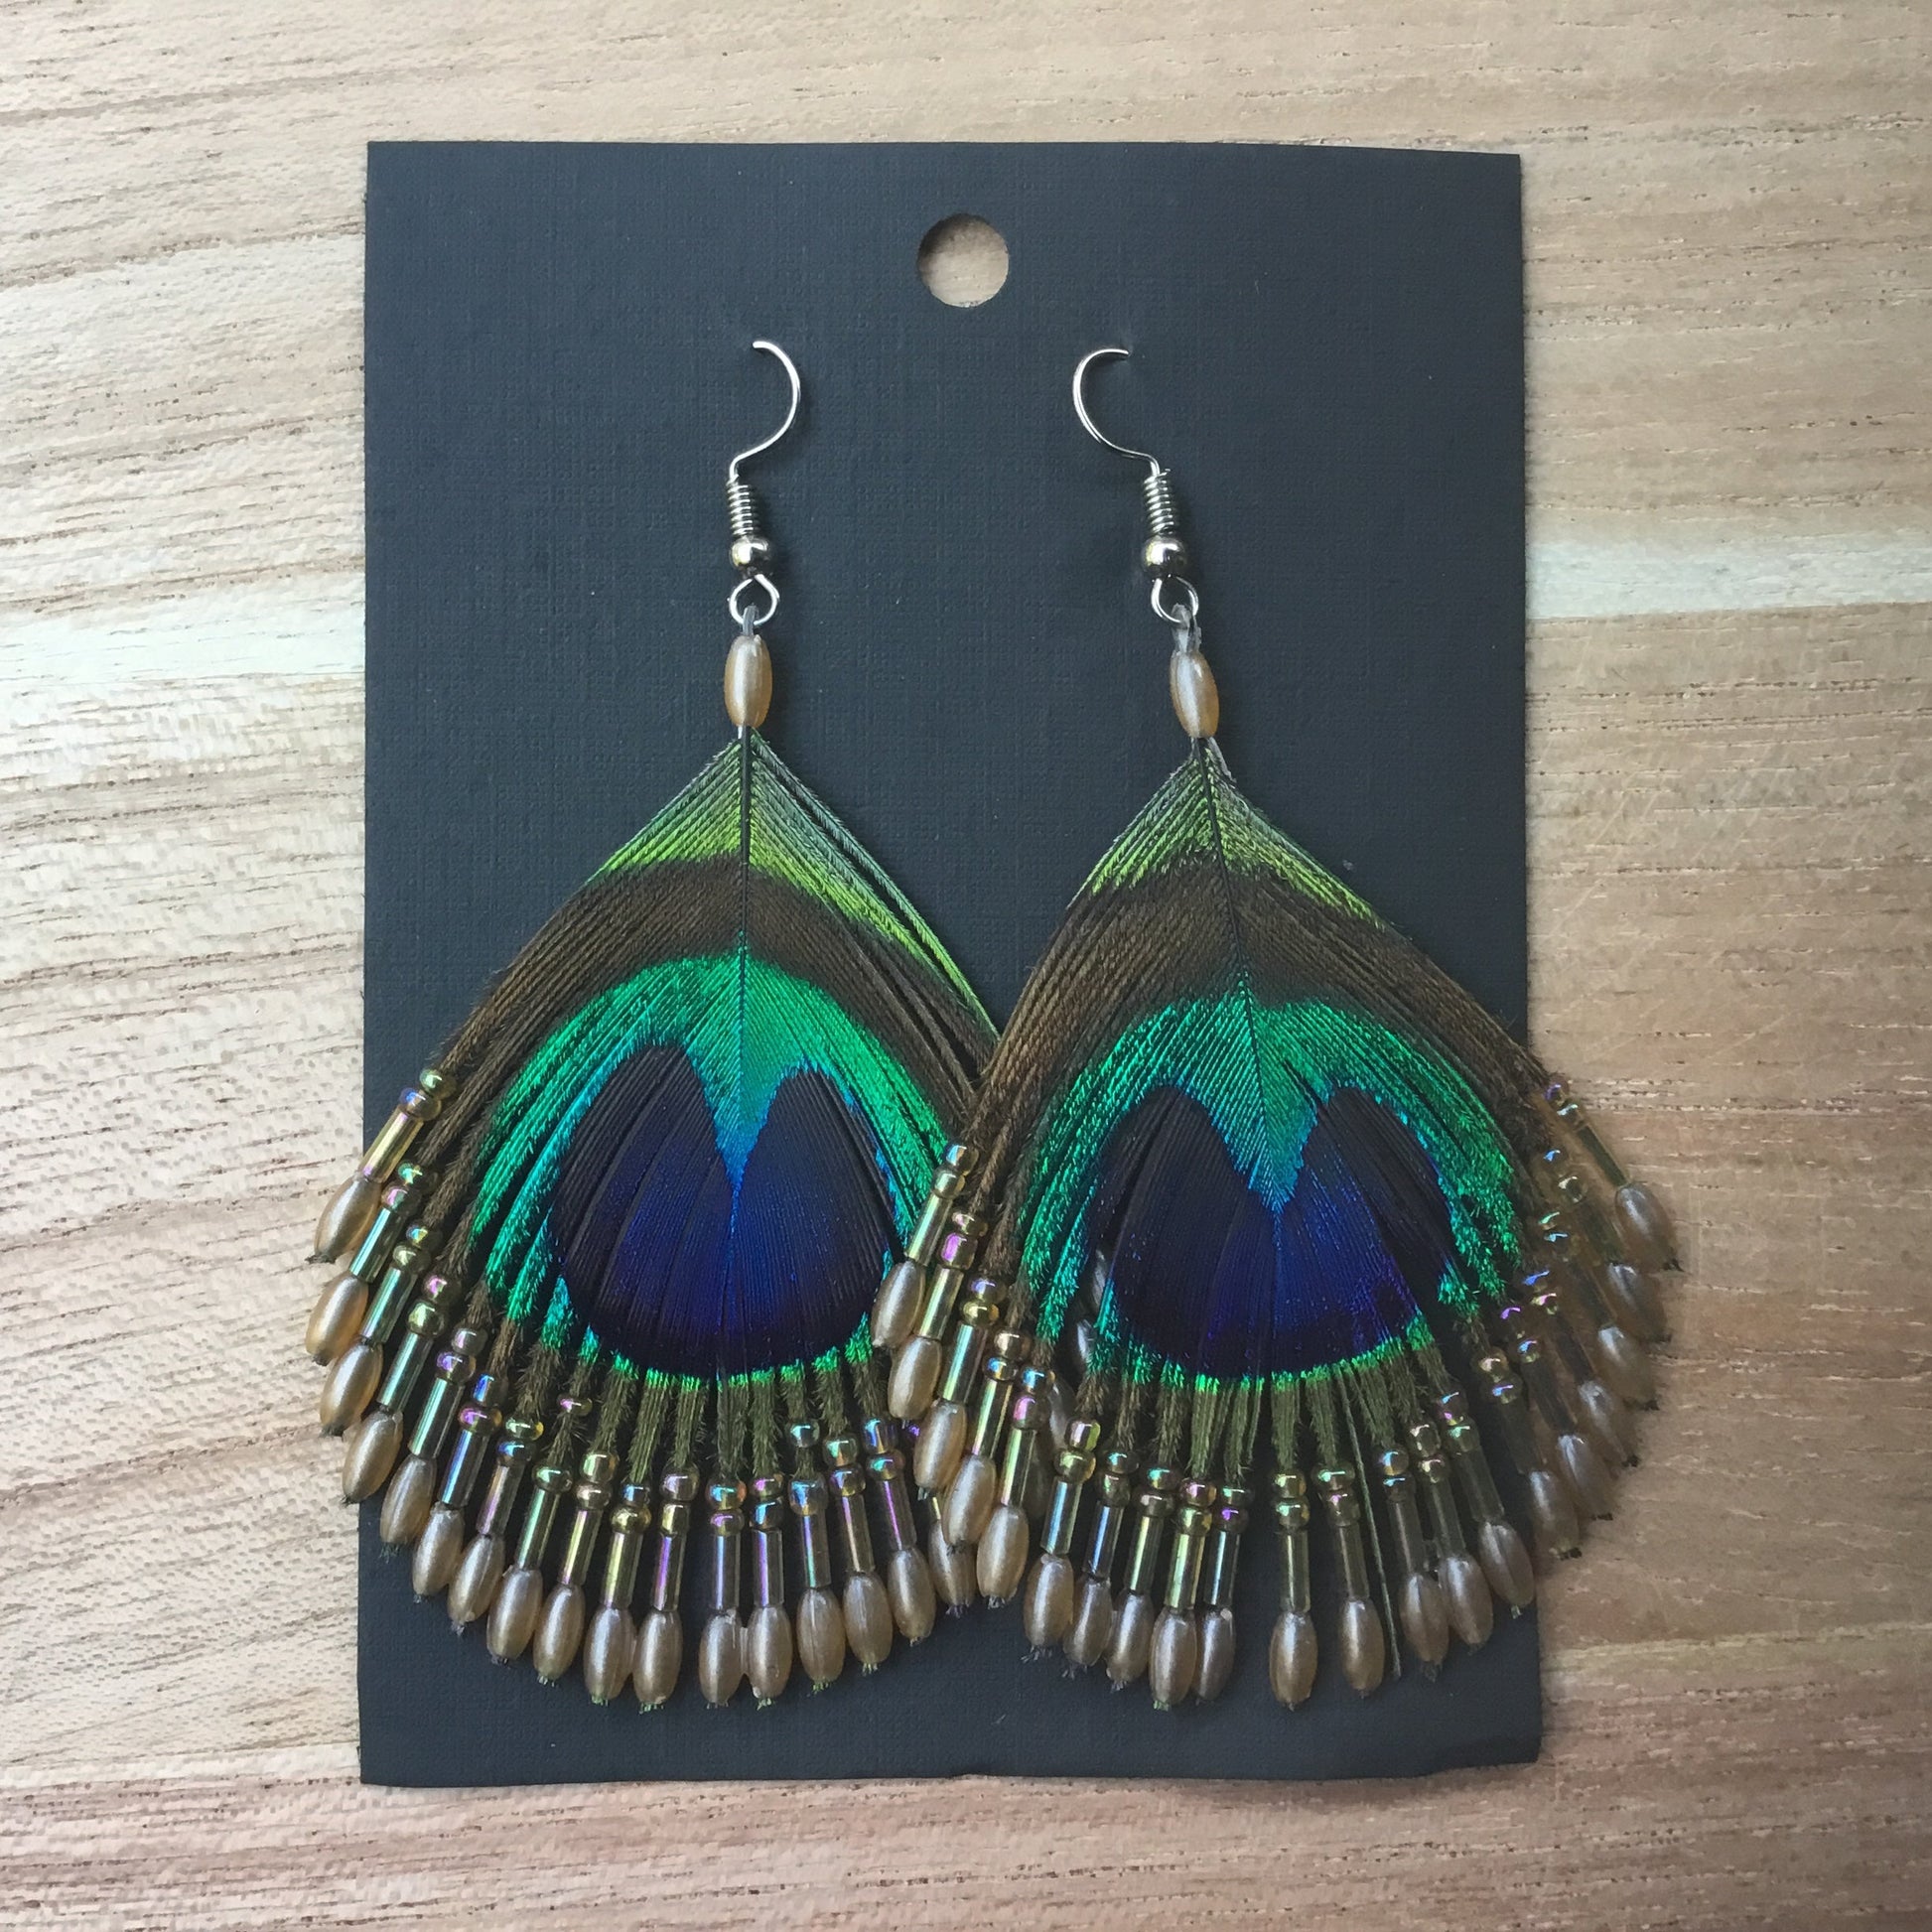 peacock feather earrings threaded with beads.